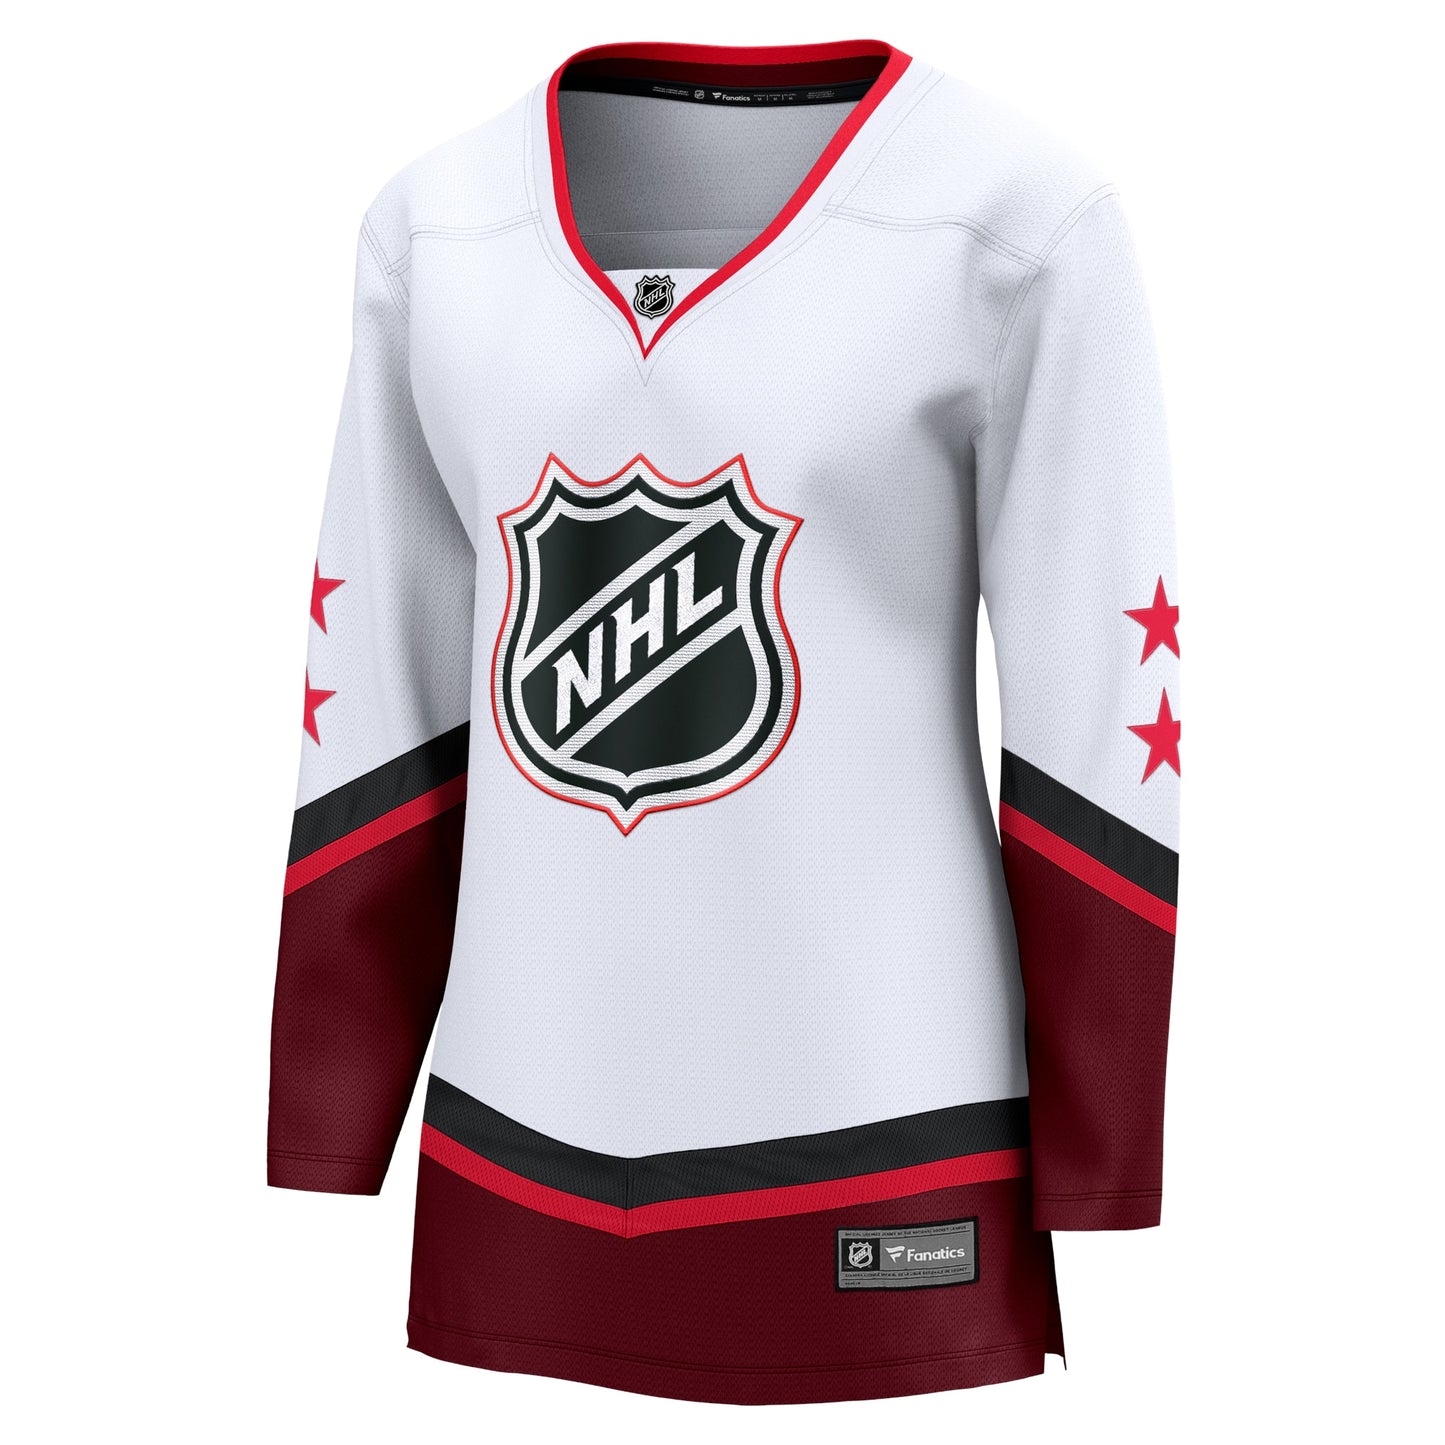 Fanatics Branded Women's 2022 NHL All-Star Game Eastern Conference Breakaway Jersey - White